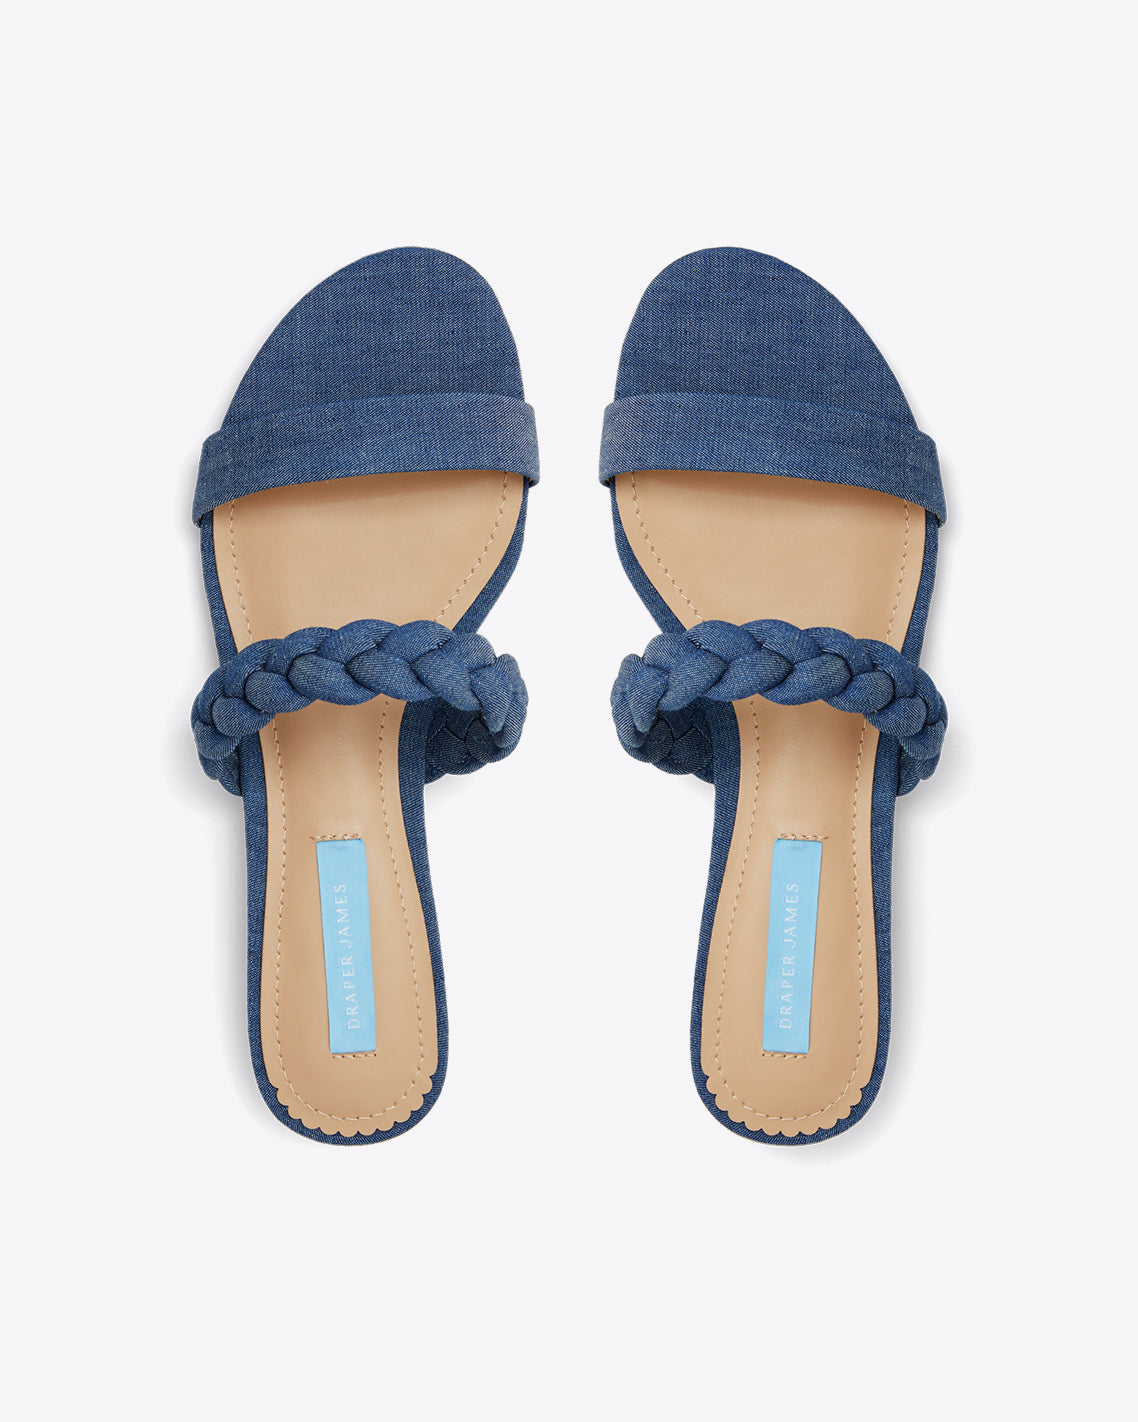 Braided Ellie Sandals in Chambray